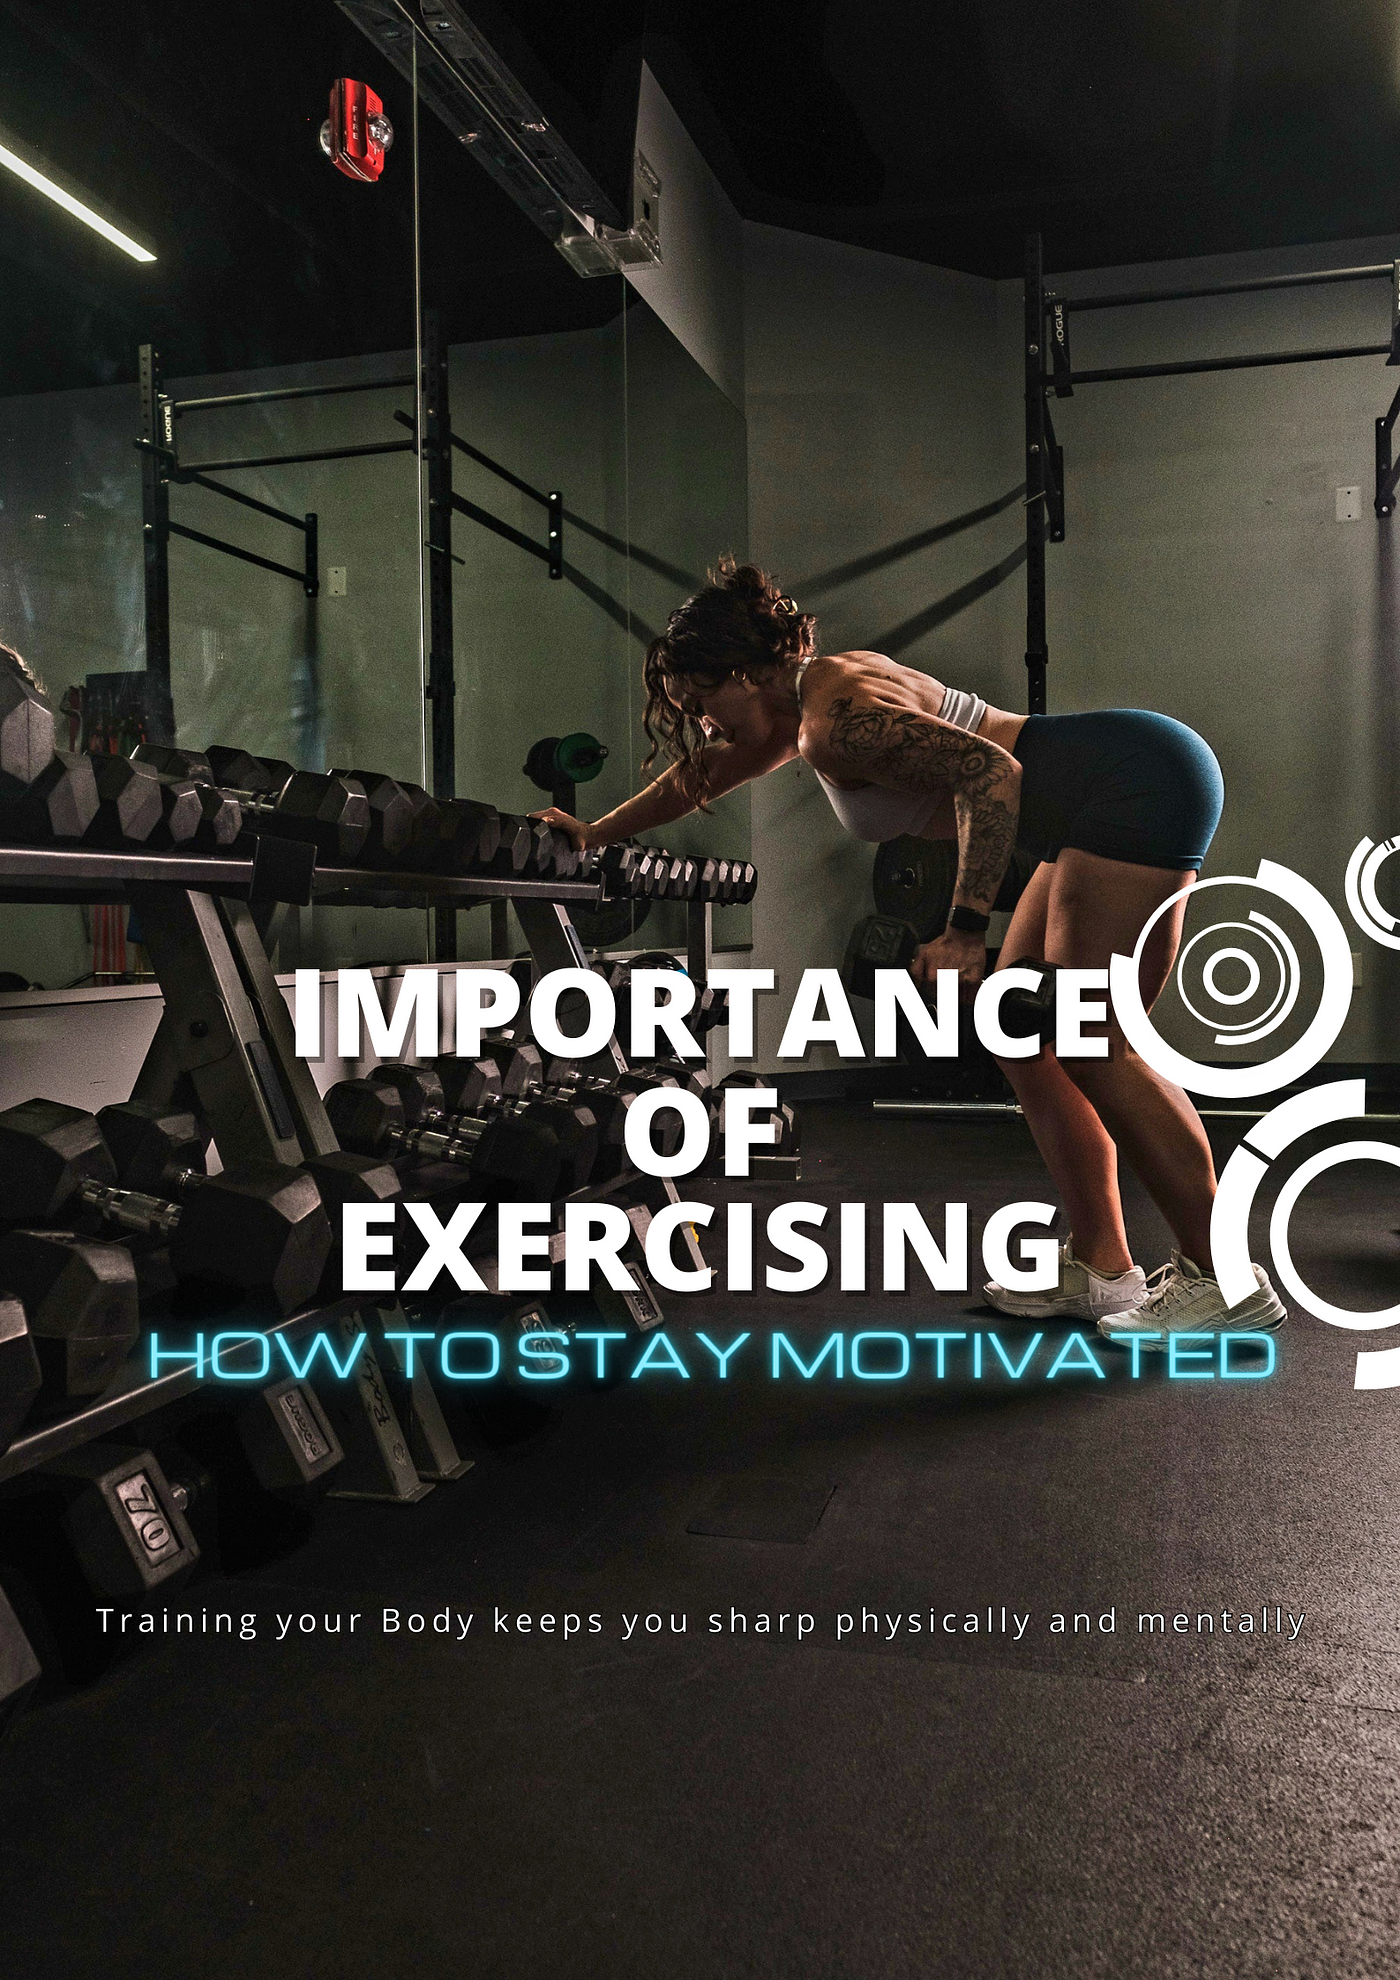 Staying Exercise-Ready: Motivation Boosters